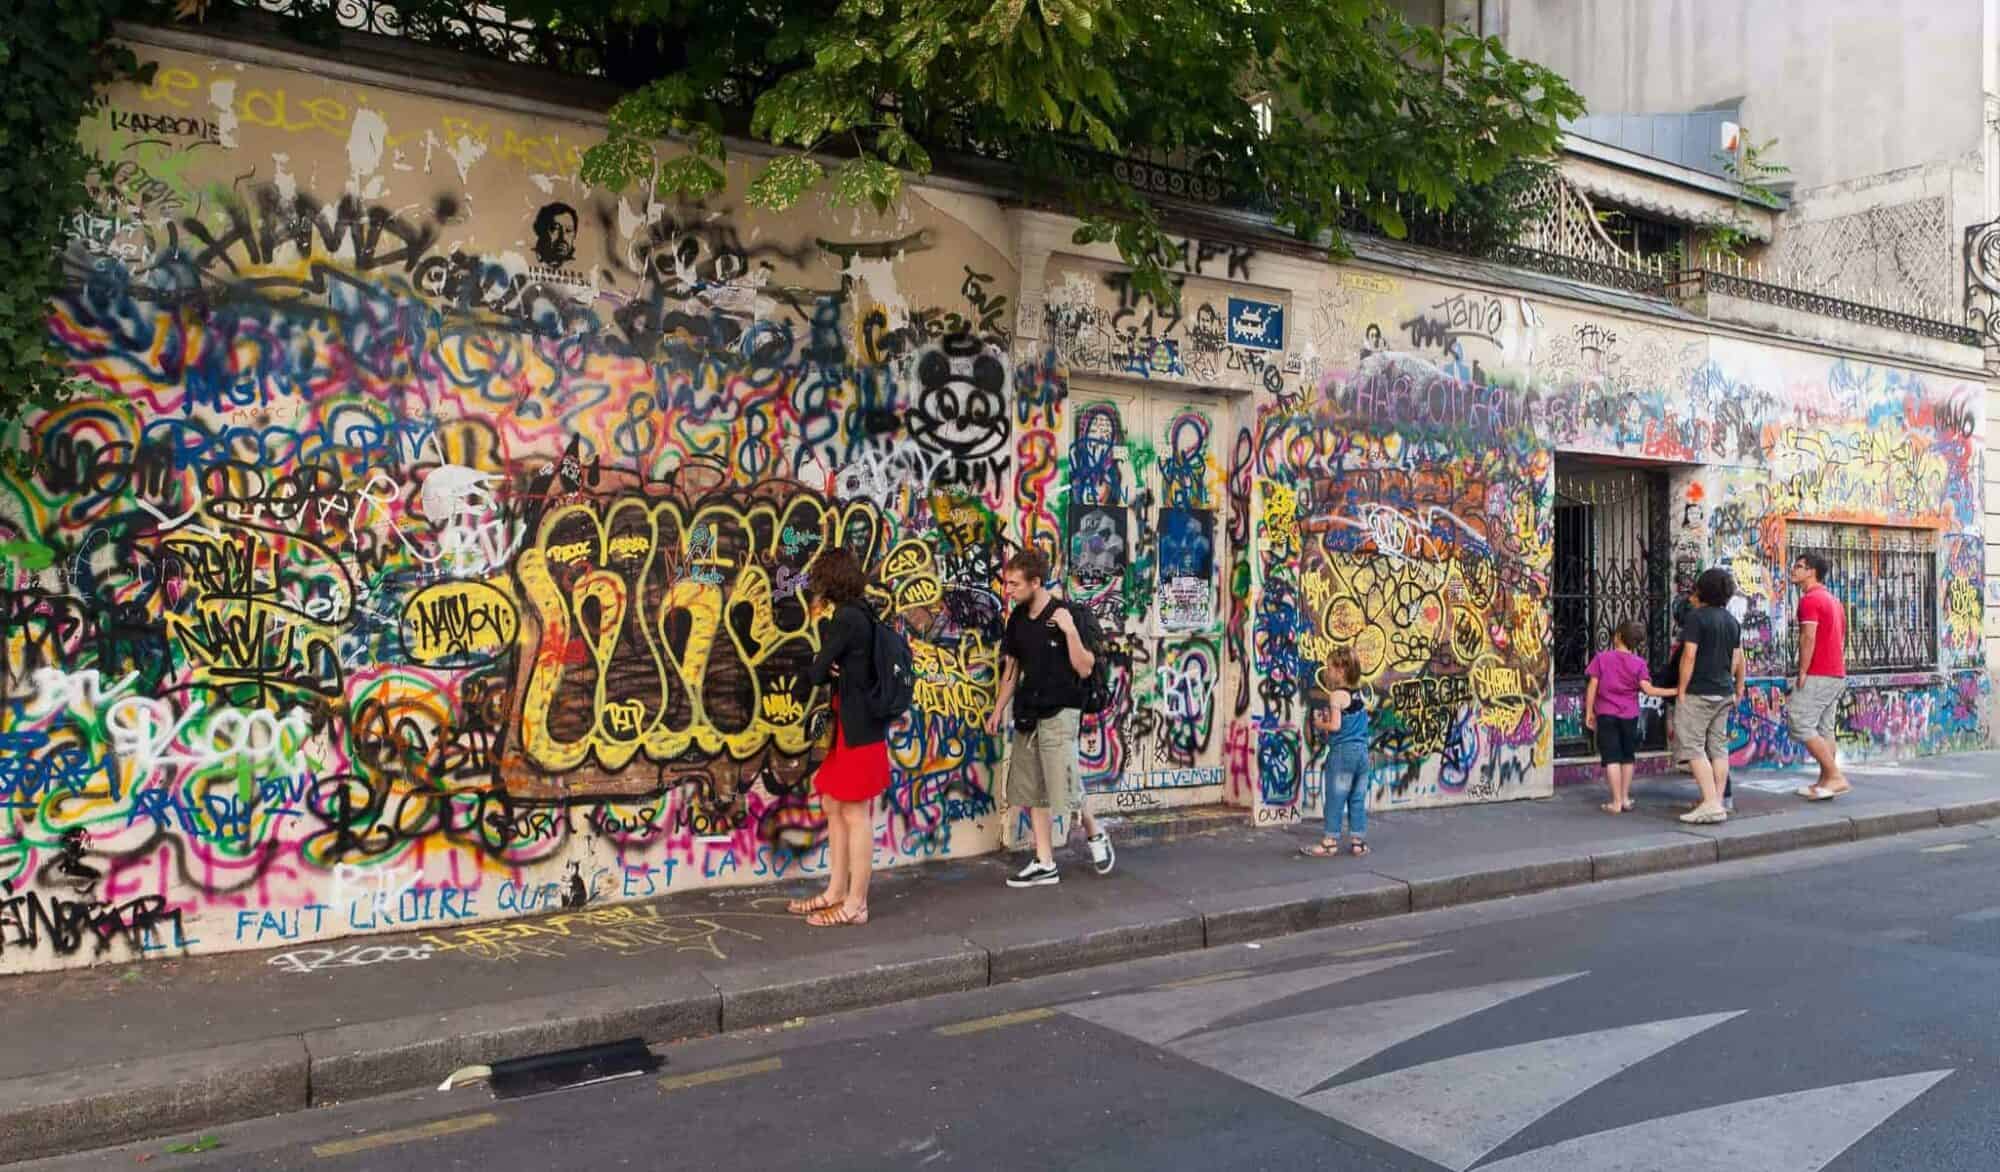 The exterior of Serge Gainsbourg's house in Paris, covered in colorful graffiti with two people walking past.